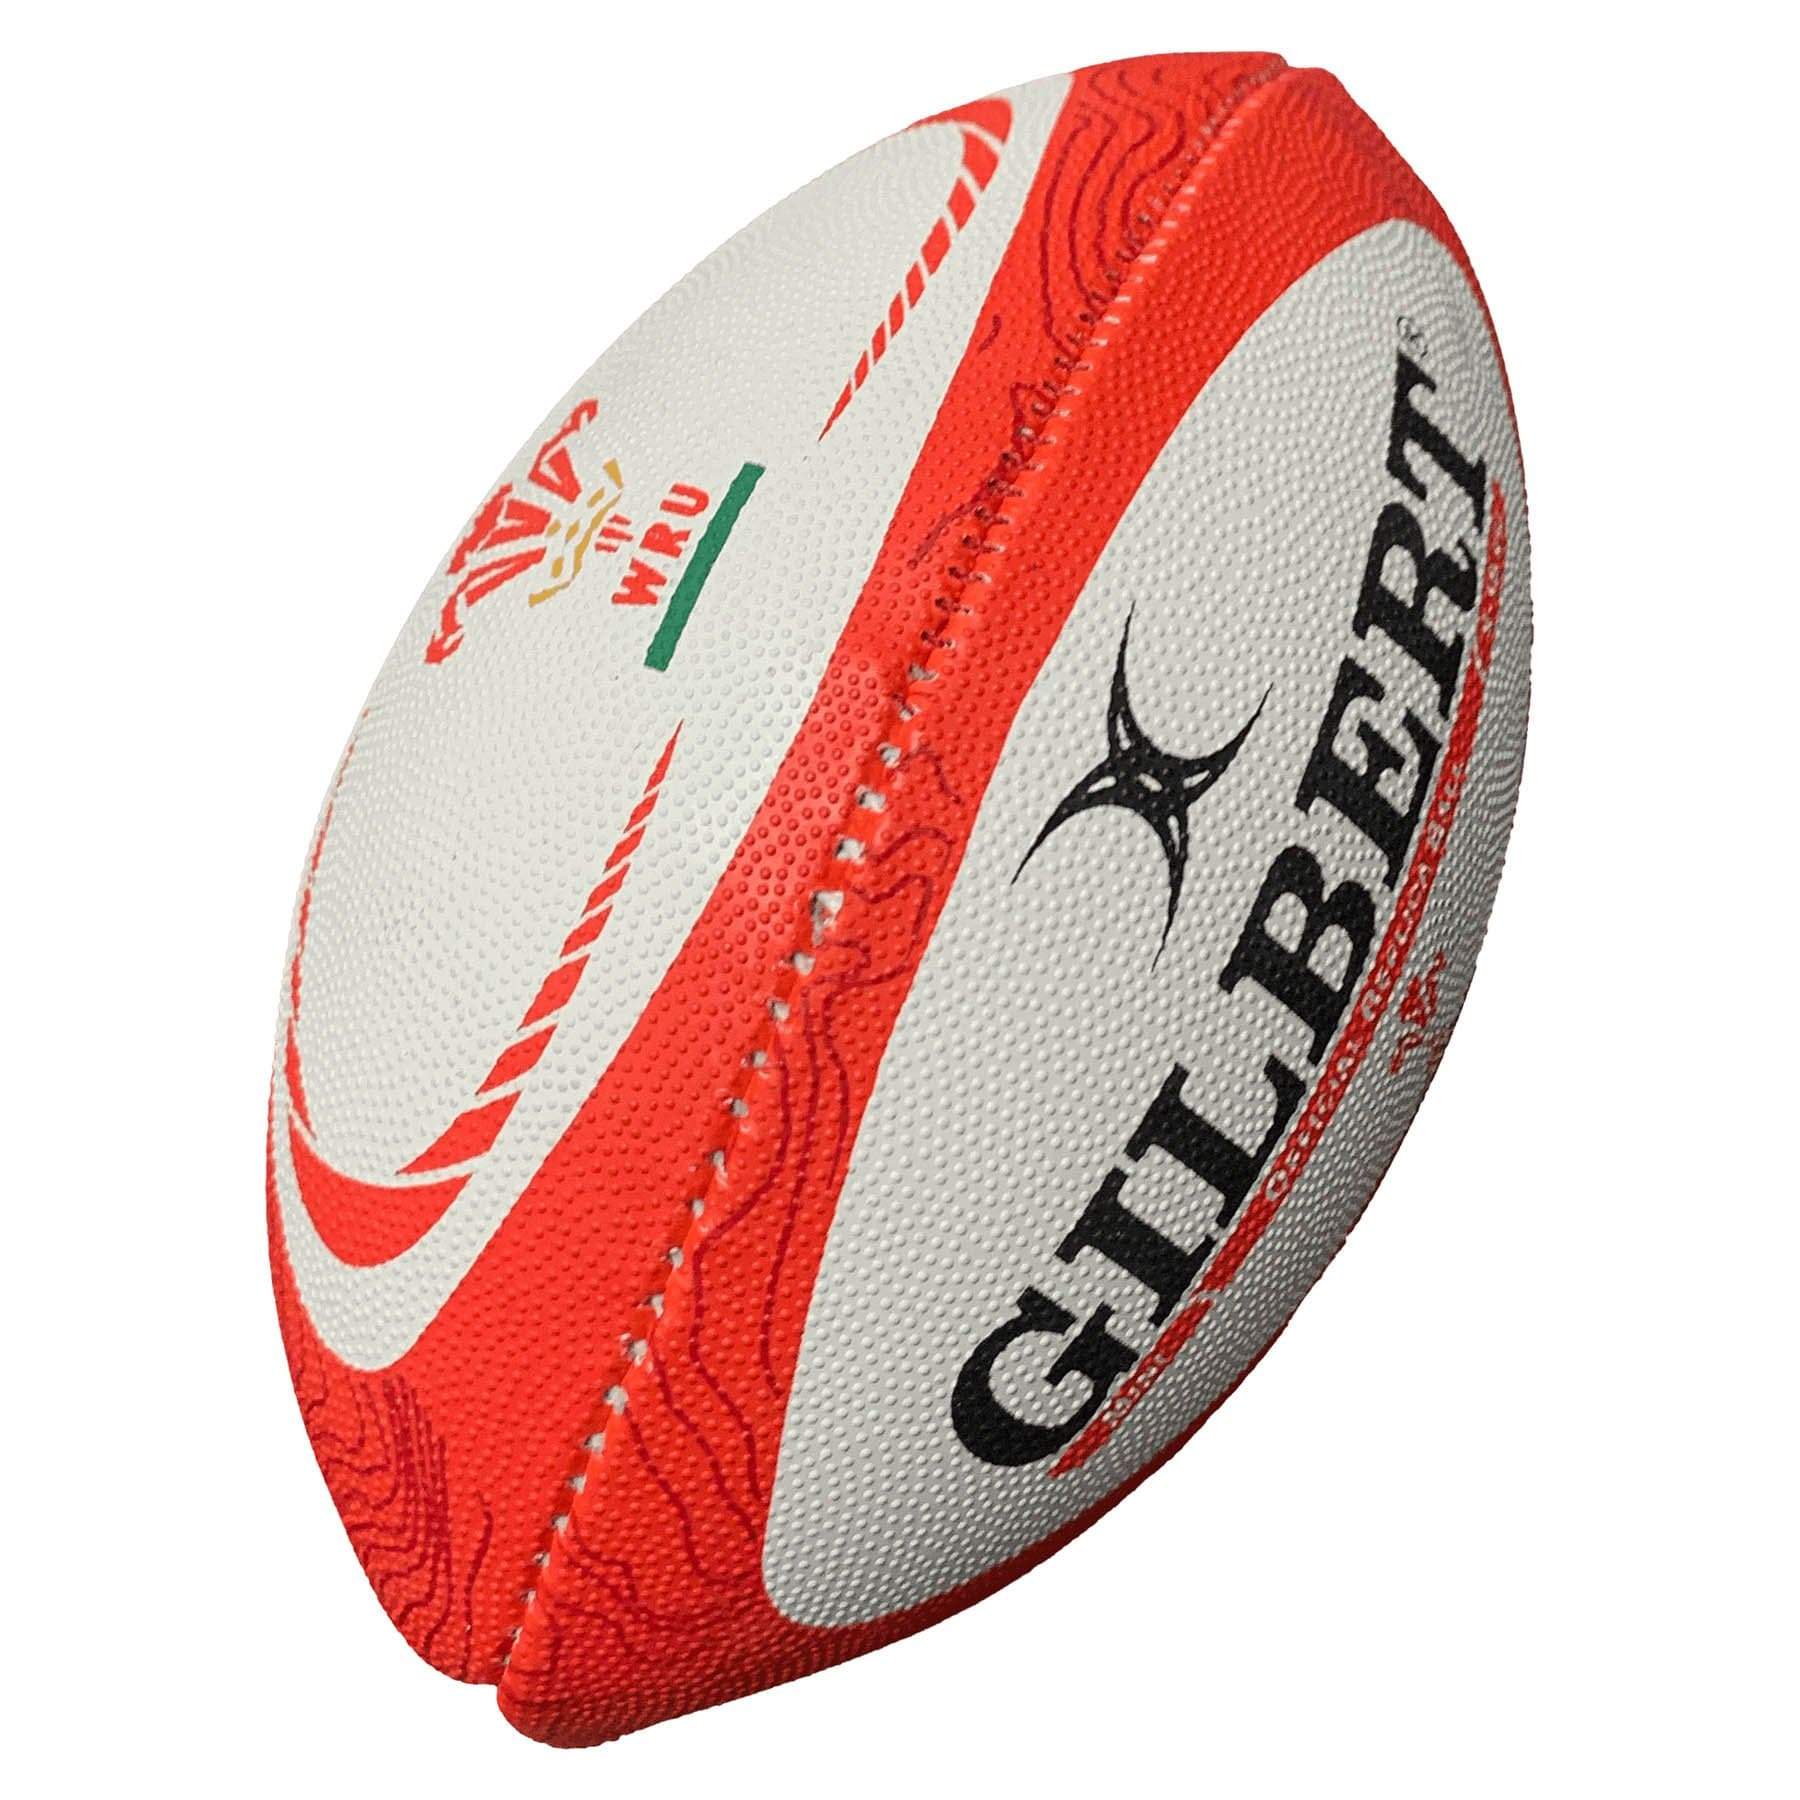 Rugby Imports Gilbert Wales Mini Rugby Ball